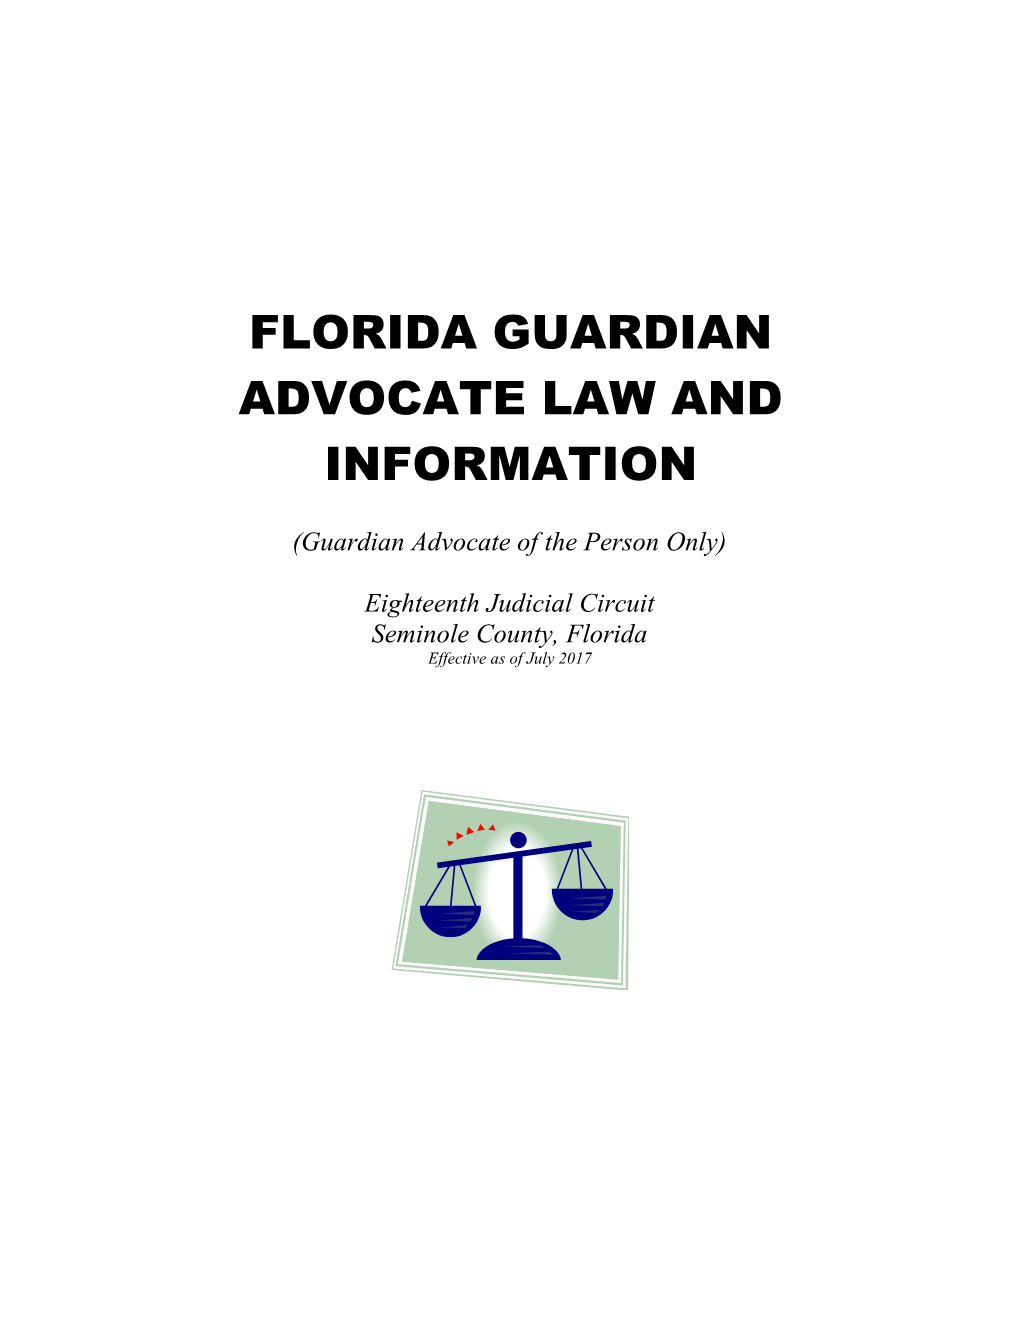 Florida Guardian Advocate Law and Information